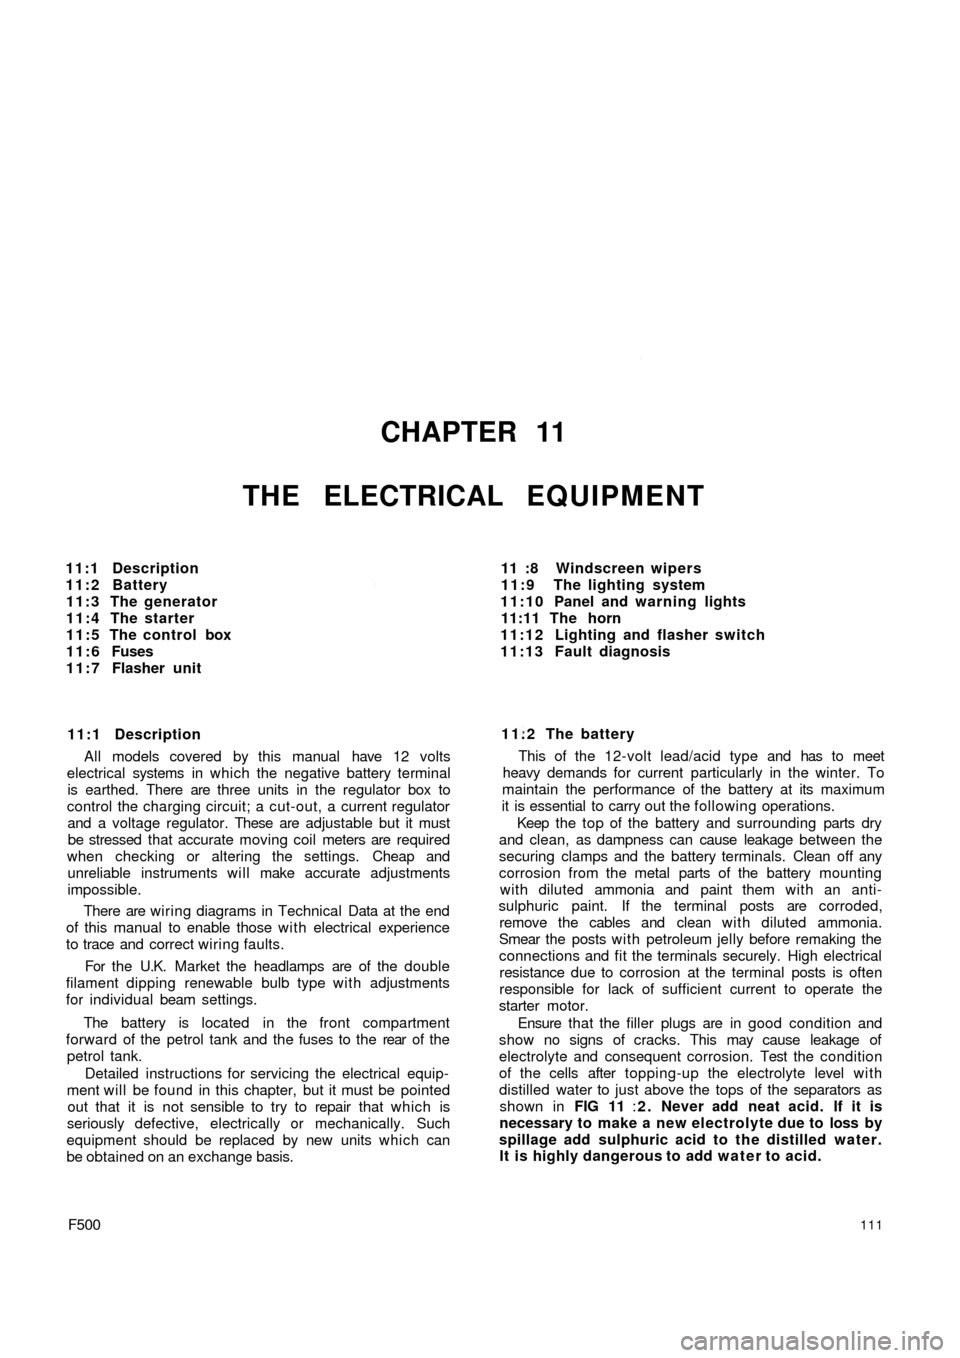 FIAT 500 1969 1.G Workshop Manual CHAPTER 11
THE ELECTRICAL EQUIPMENT
11:1 Description
11:2 Battery
11:3 The generator
11:4 The starter
11:5 The control box
1 1 : 6 Fuses
1 1 : 7 Flasher unit
11:1 Description
All models covered by thi